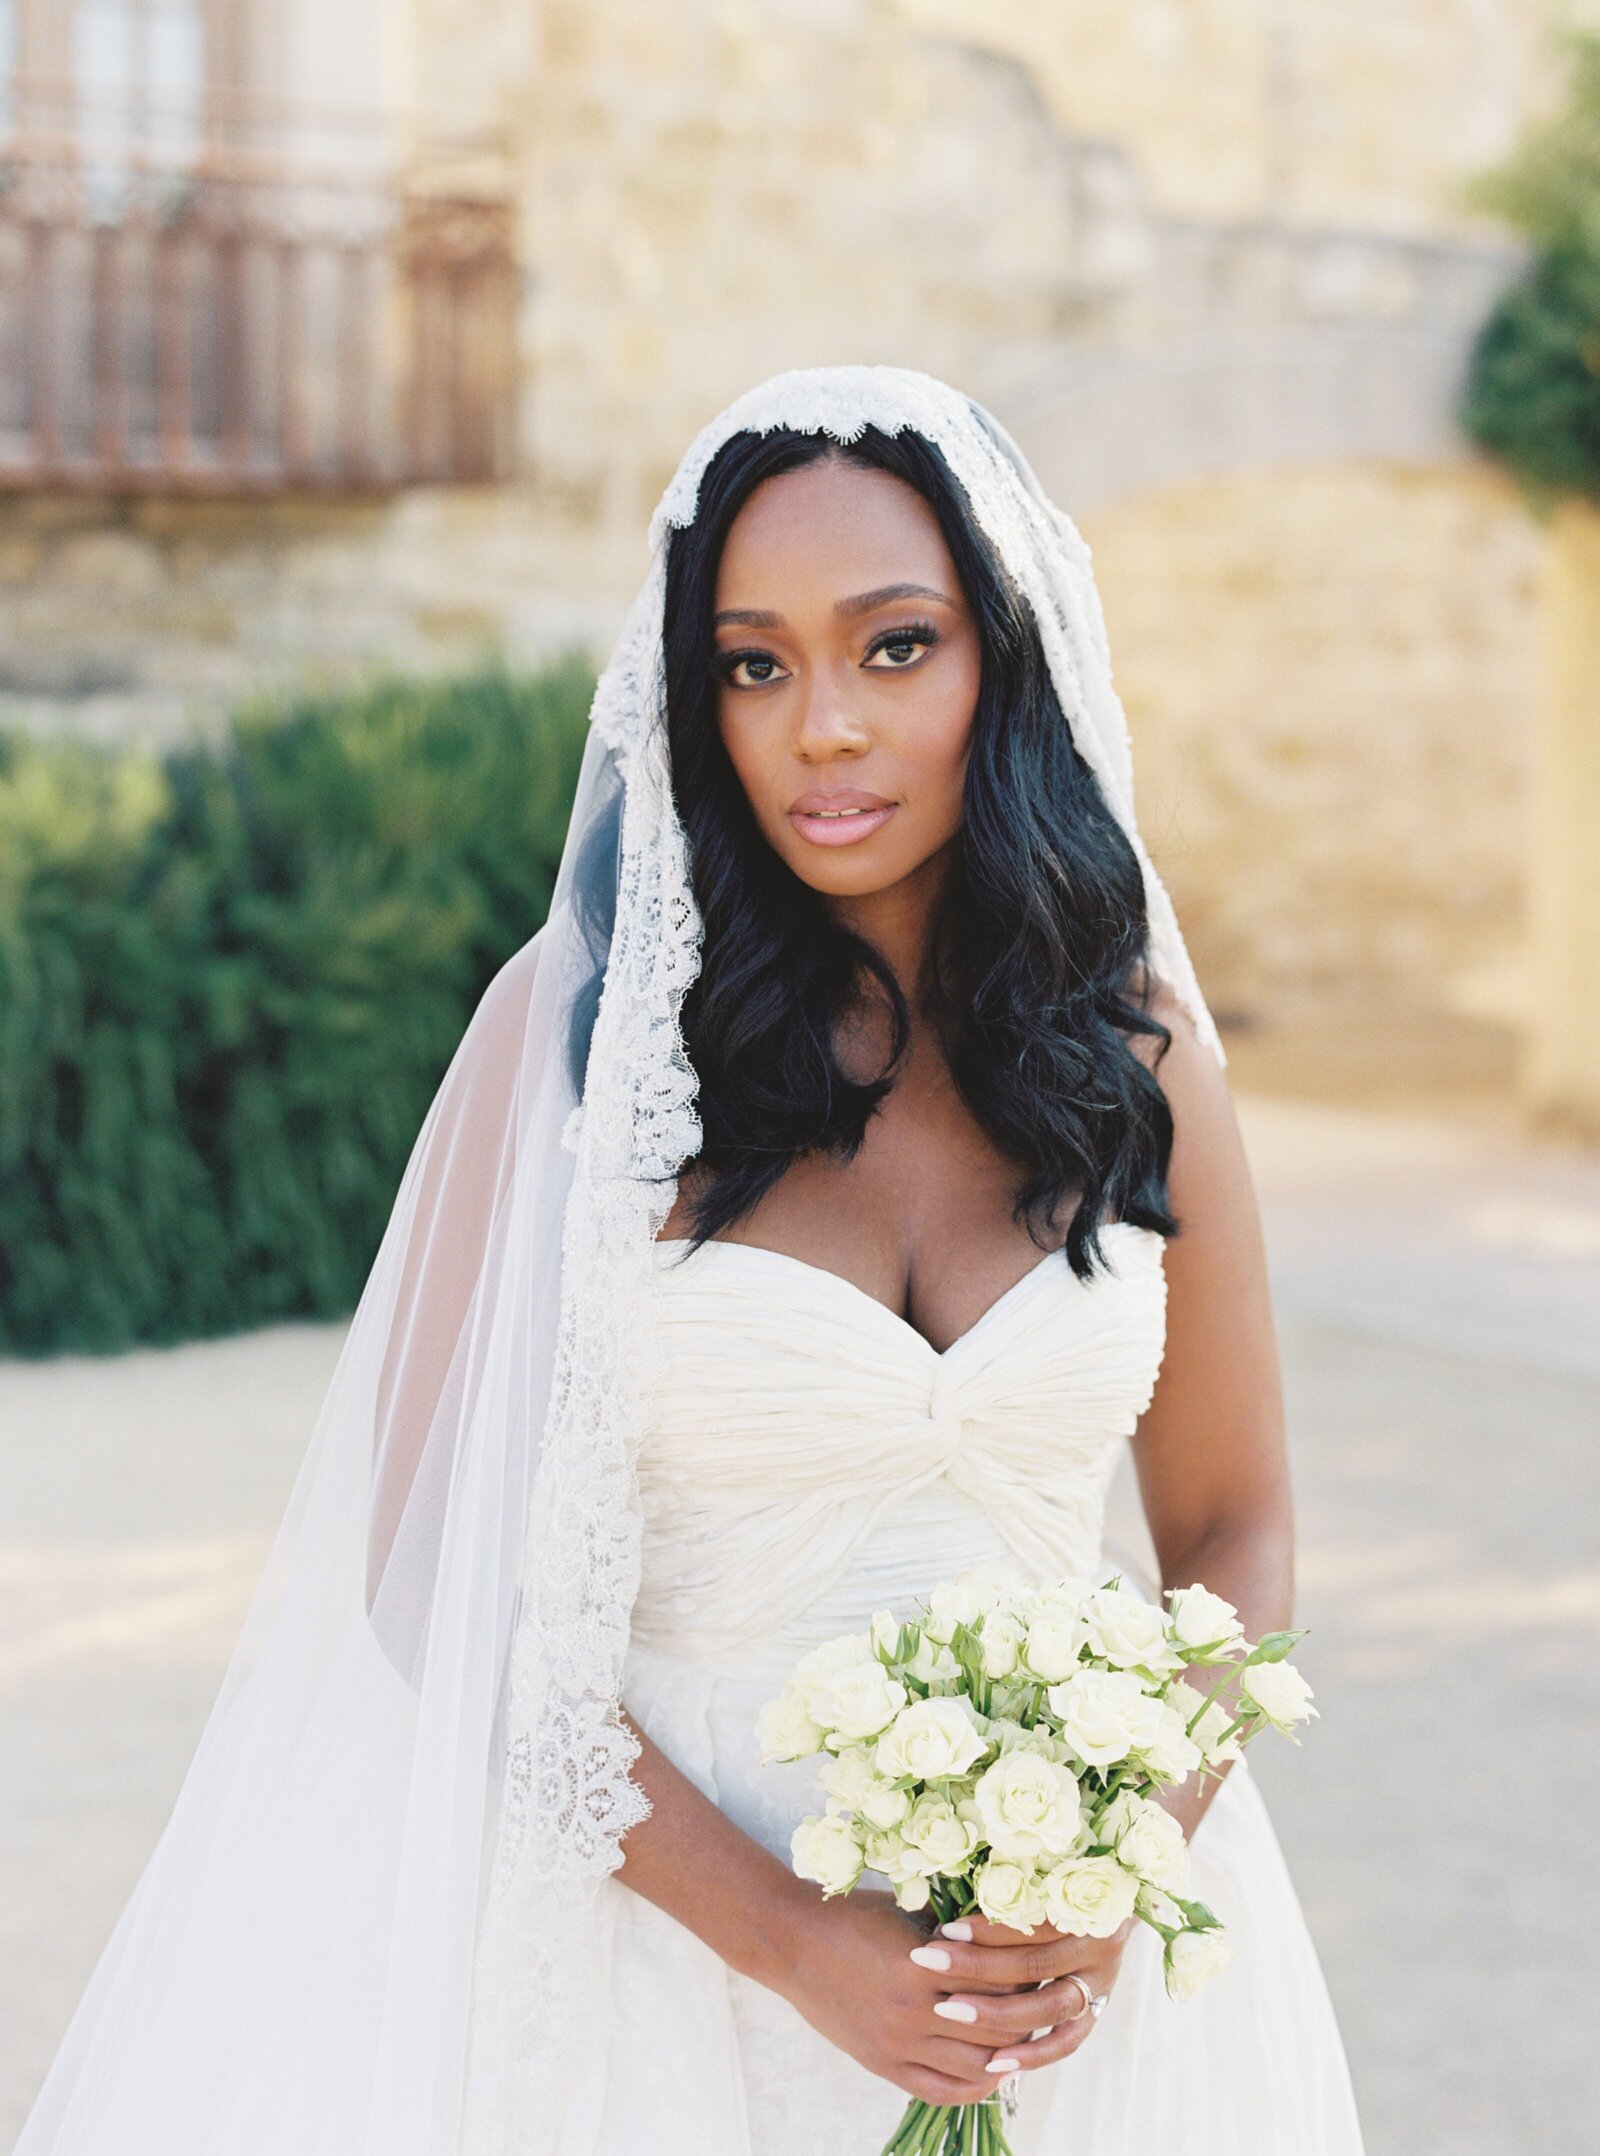 bride holding a bouquet of white flowers and wearing a cathedral veil